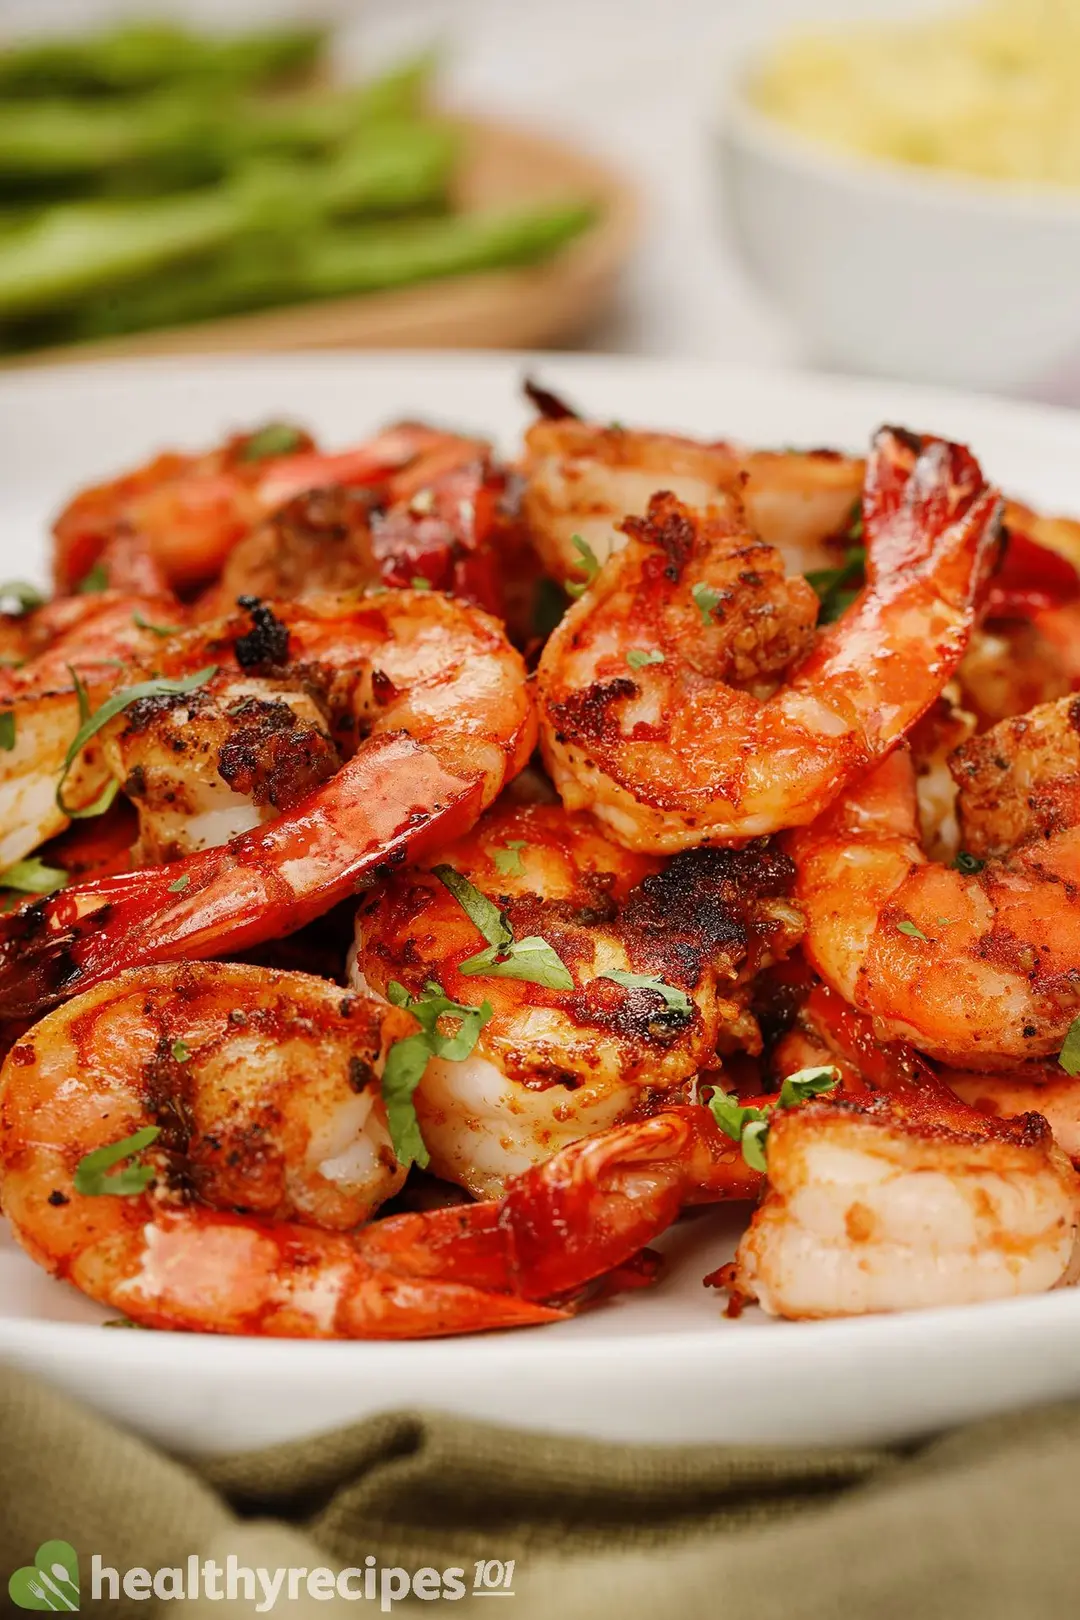 What to Make With the Leftover Blackened Shrimp